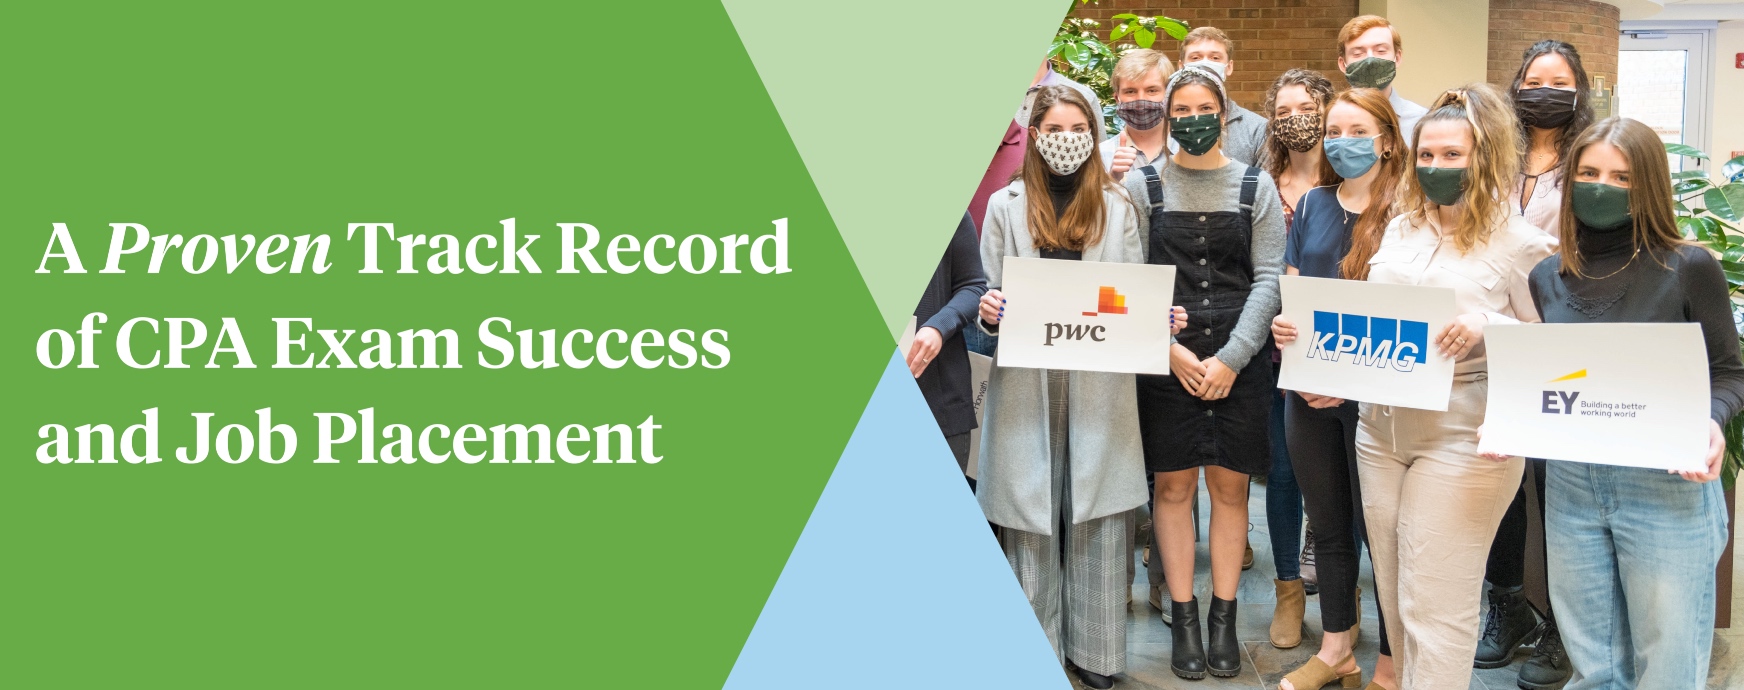 A proven track record of CPA exam success and job placement